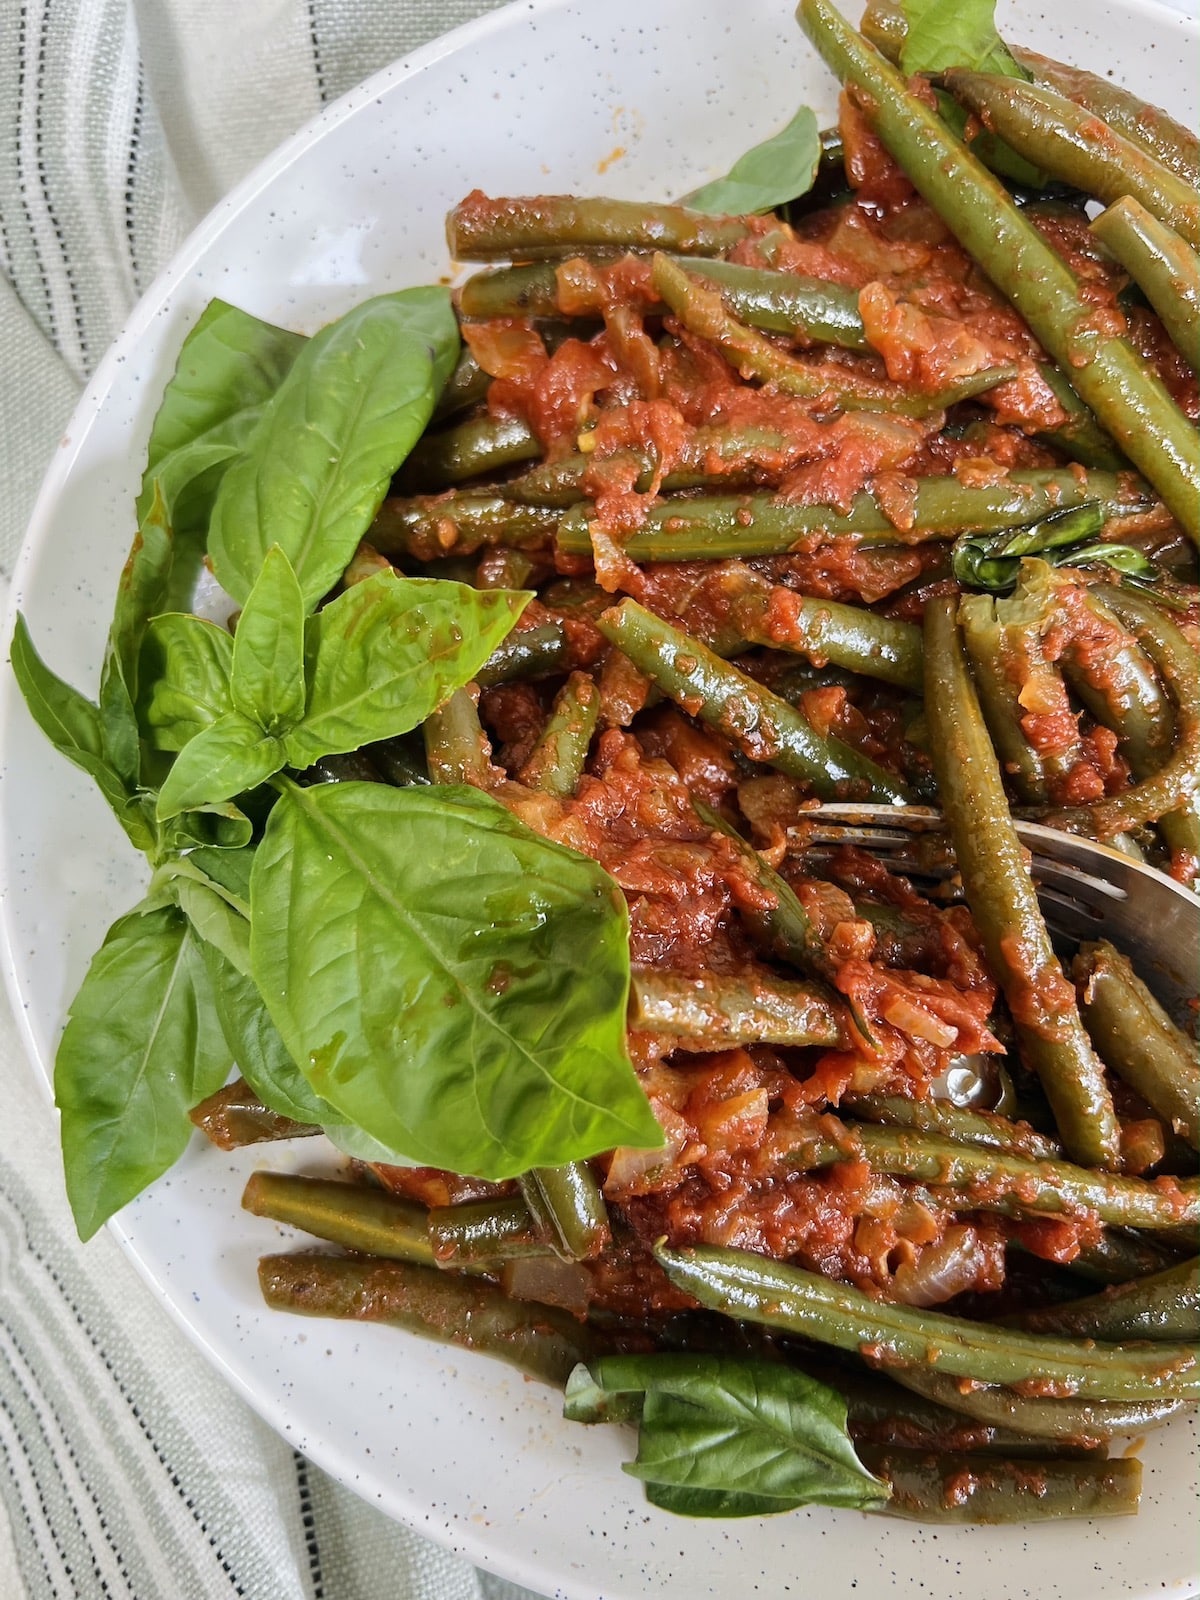 Finished Italian green beans in tomato sauce styled on plate with fresh basil garnish.